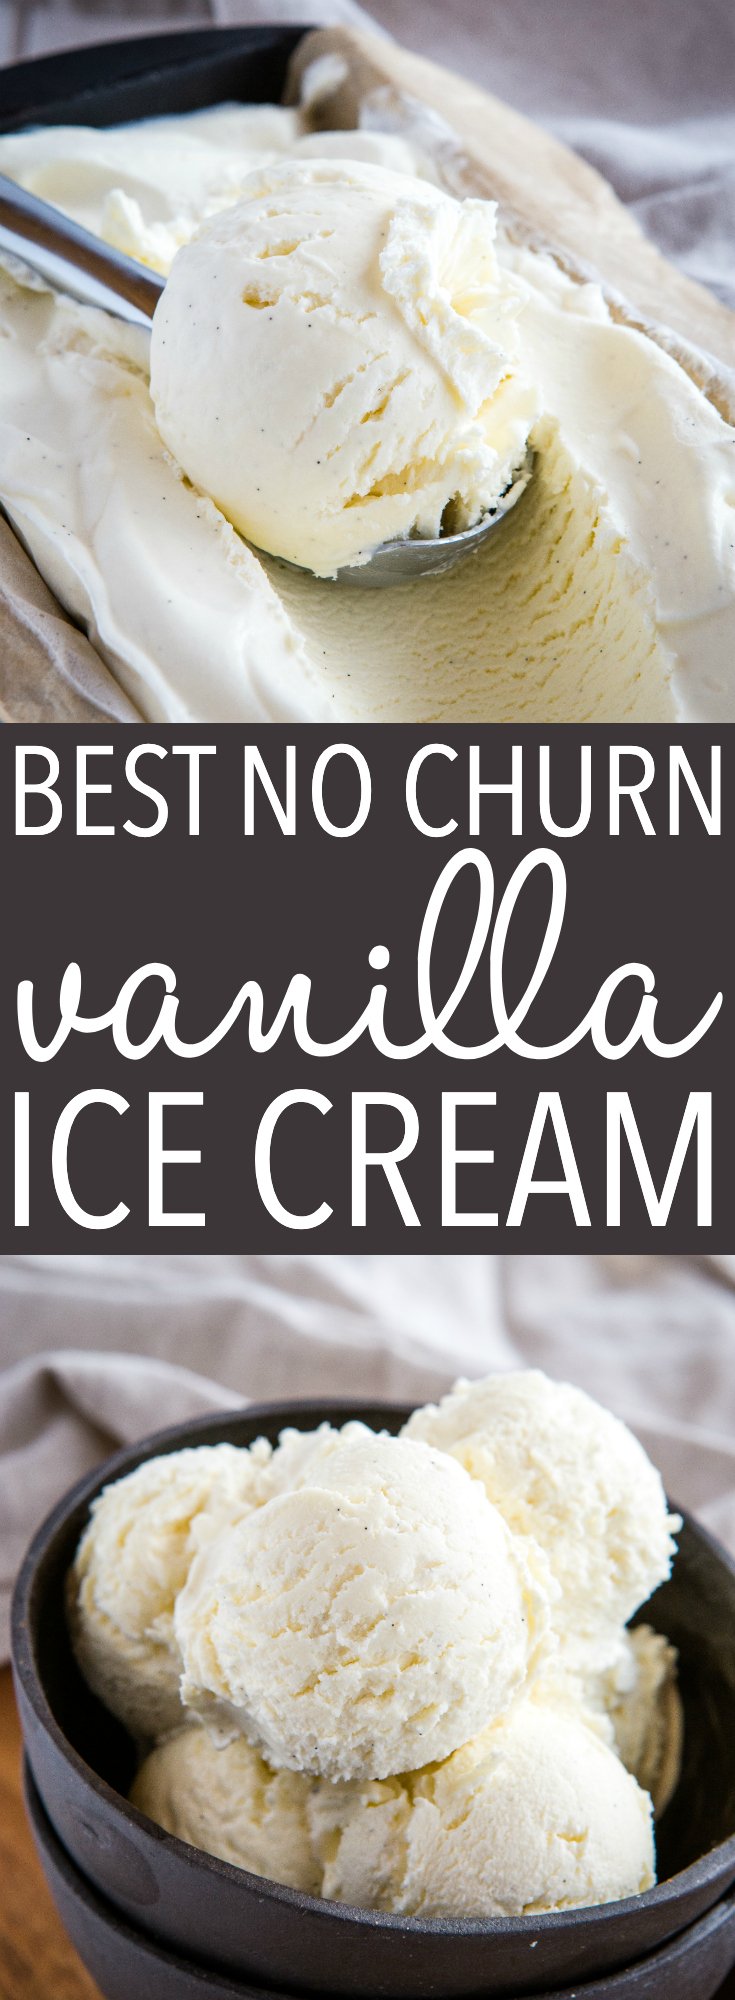 This Best Ever No Churn Vanilla Ice Cream is the BEST vanilla ice cream to make at home, no ice cream maker required! It's perfectly creamy, smooth and made with only 3 ingredients! Recipe from thebusybaker.ca! #icecream #nochurn #vanilla #creamy #summer #recipe #dessert #sweet #treat #cream via @busybakerblog